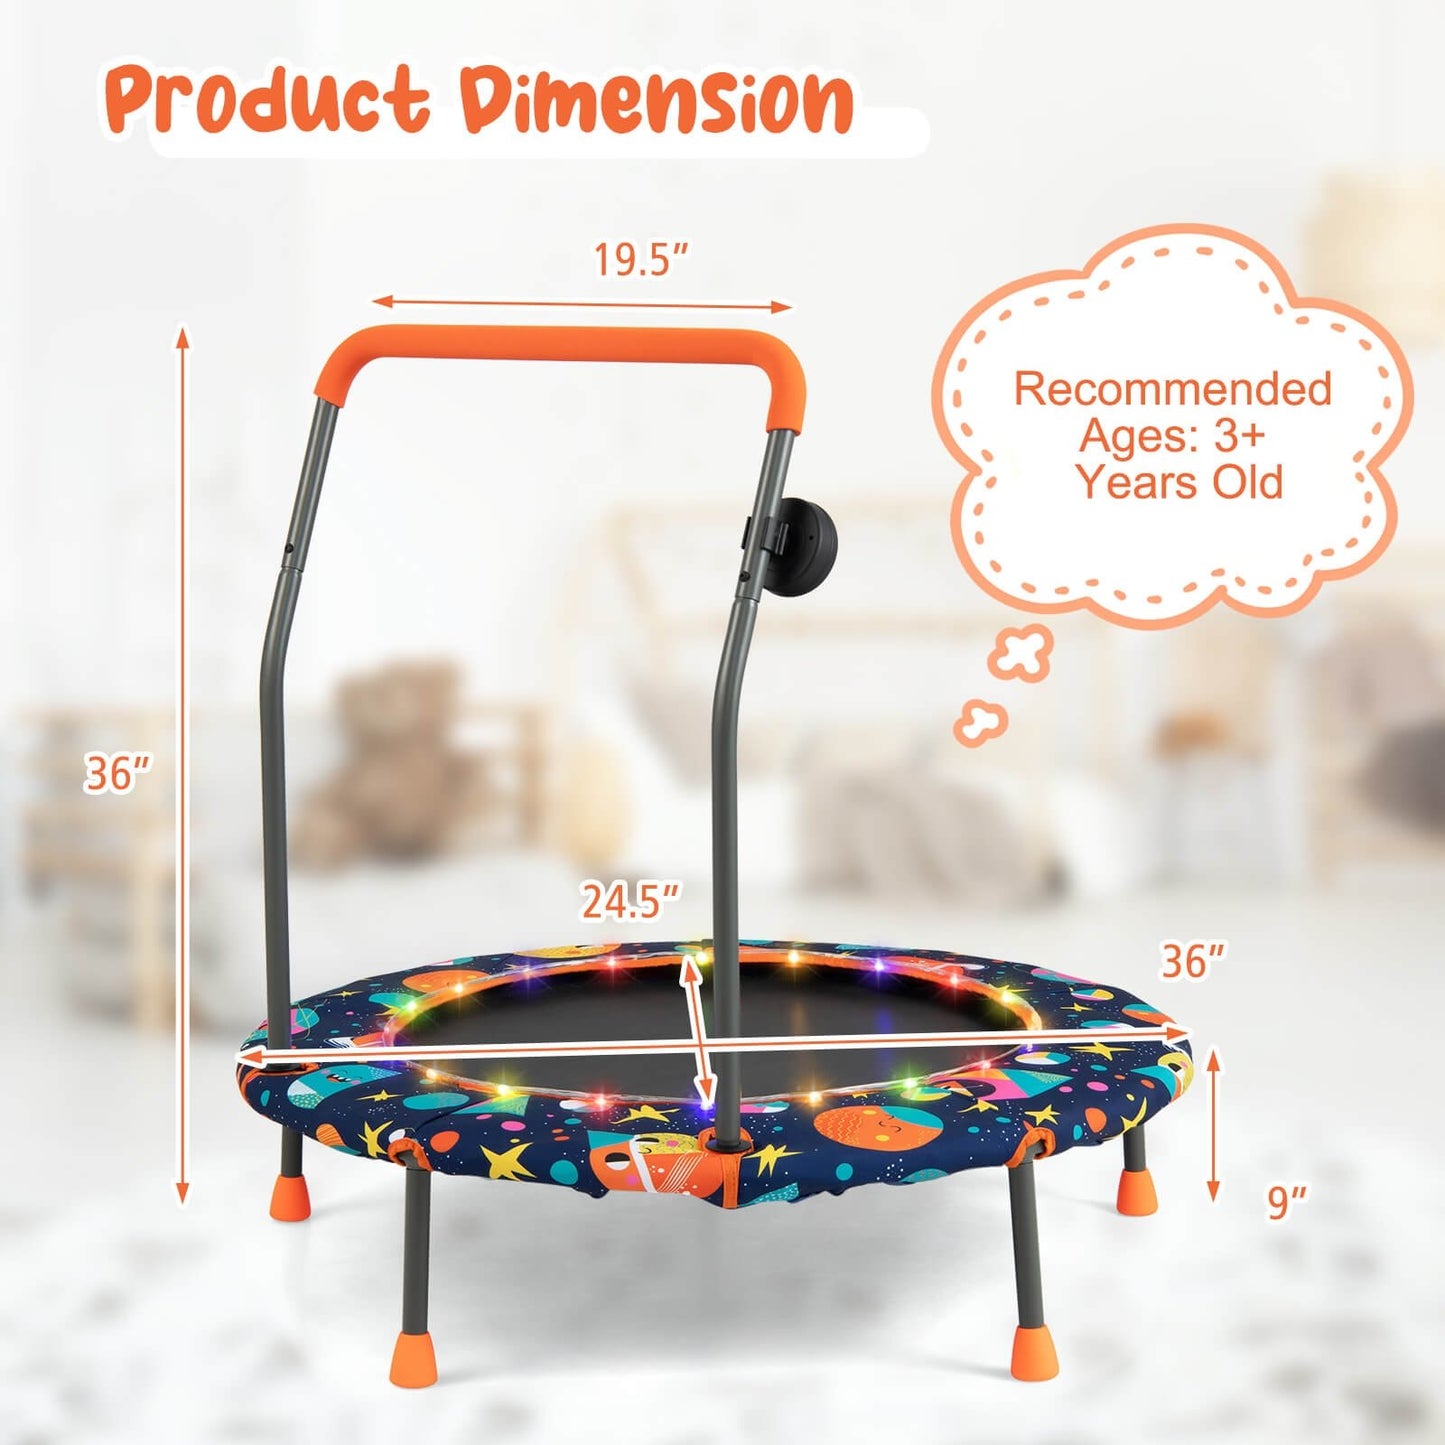 36 Inch Mini Trampoline with Colorful LED Lights and Bluetooth Speaker, Multicolor at Gallery Canada